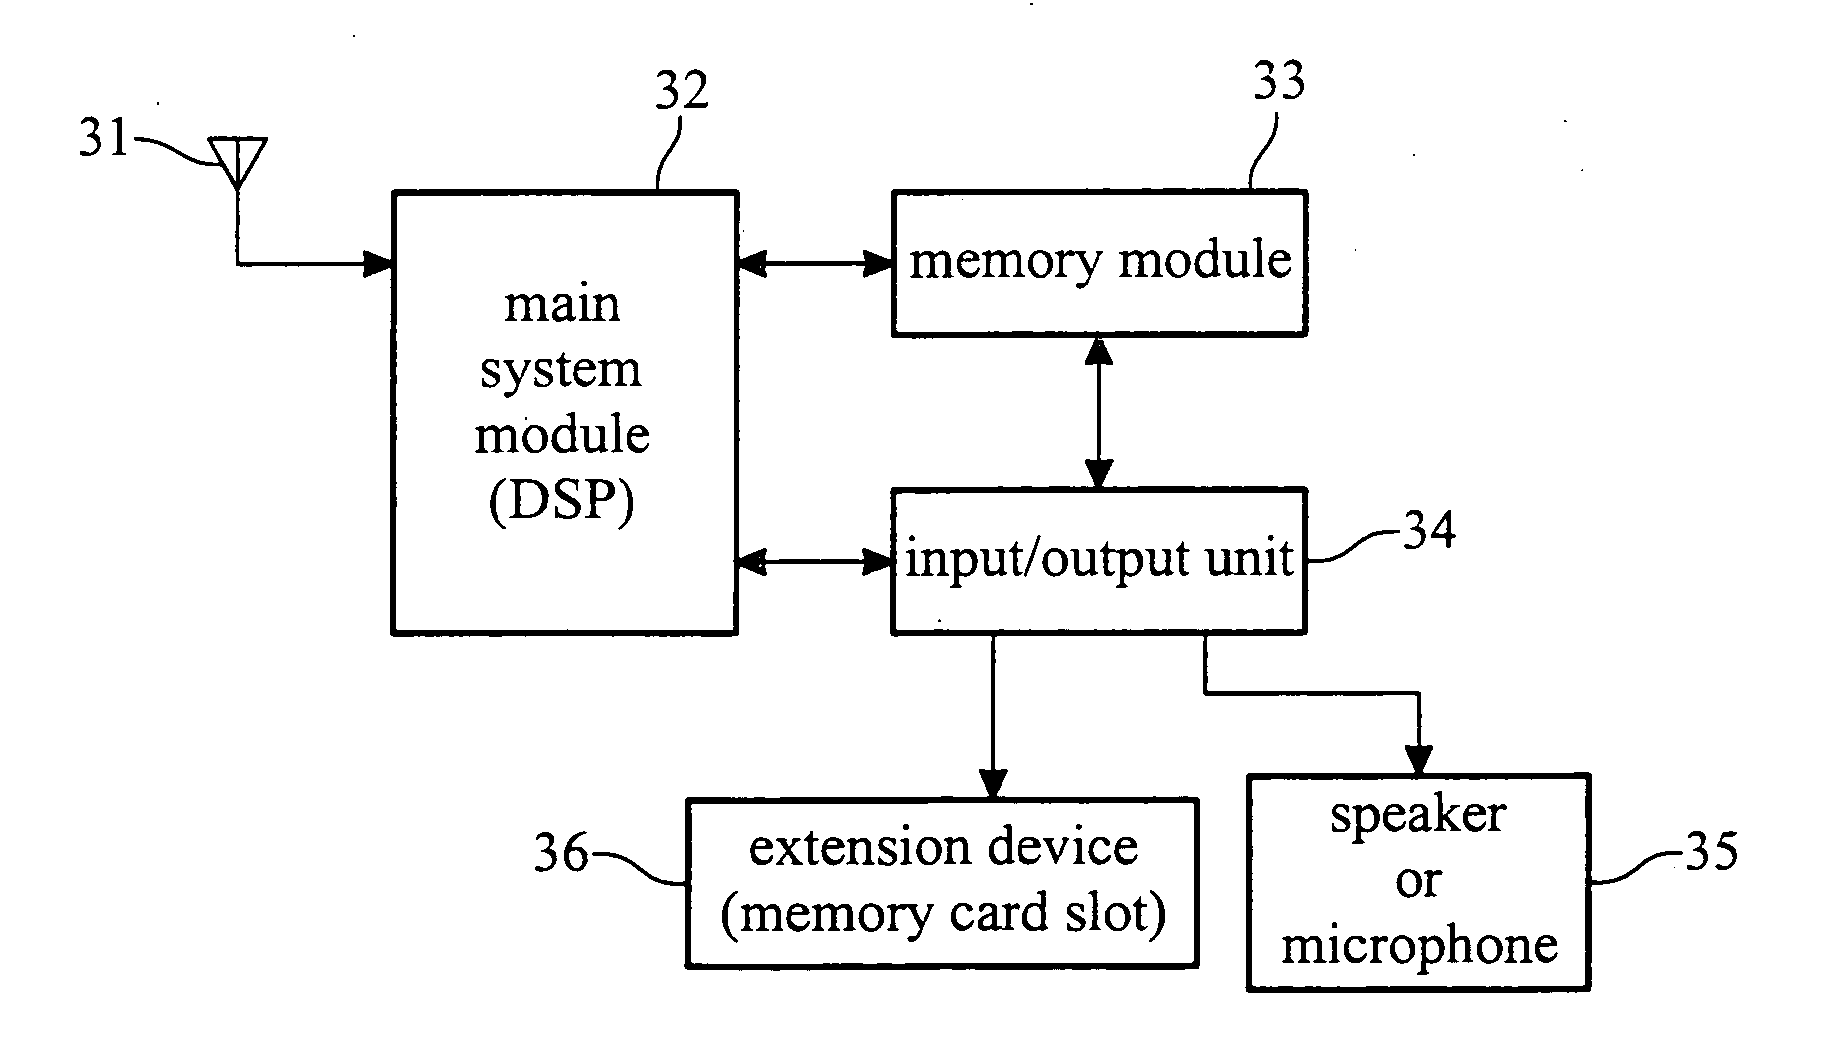 Method of providing an electronic answering function to a wireless phone